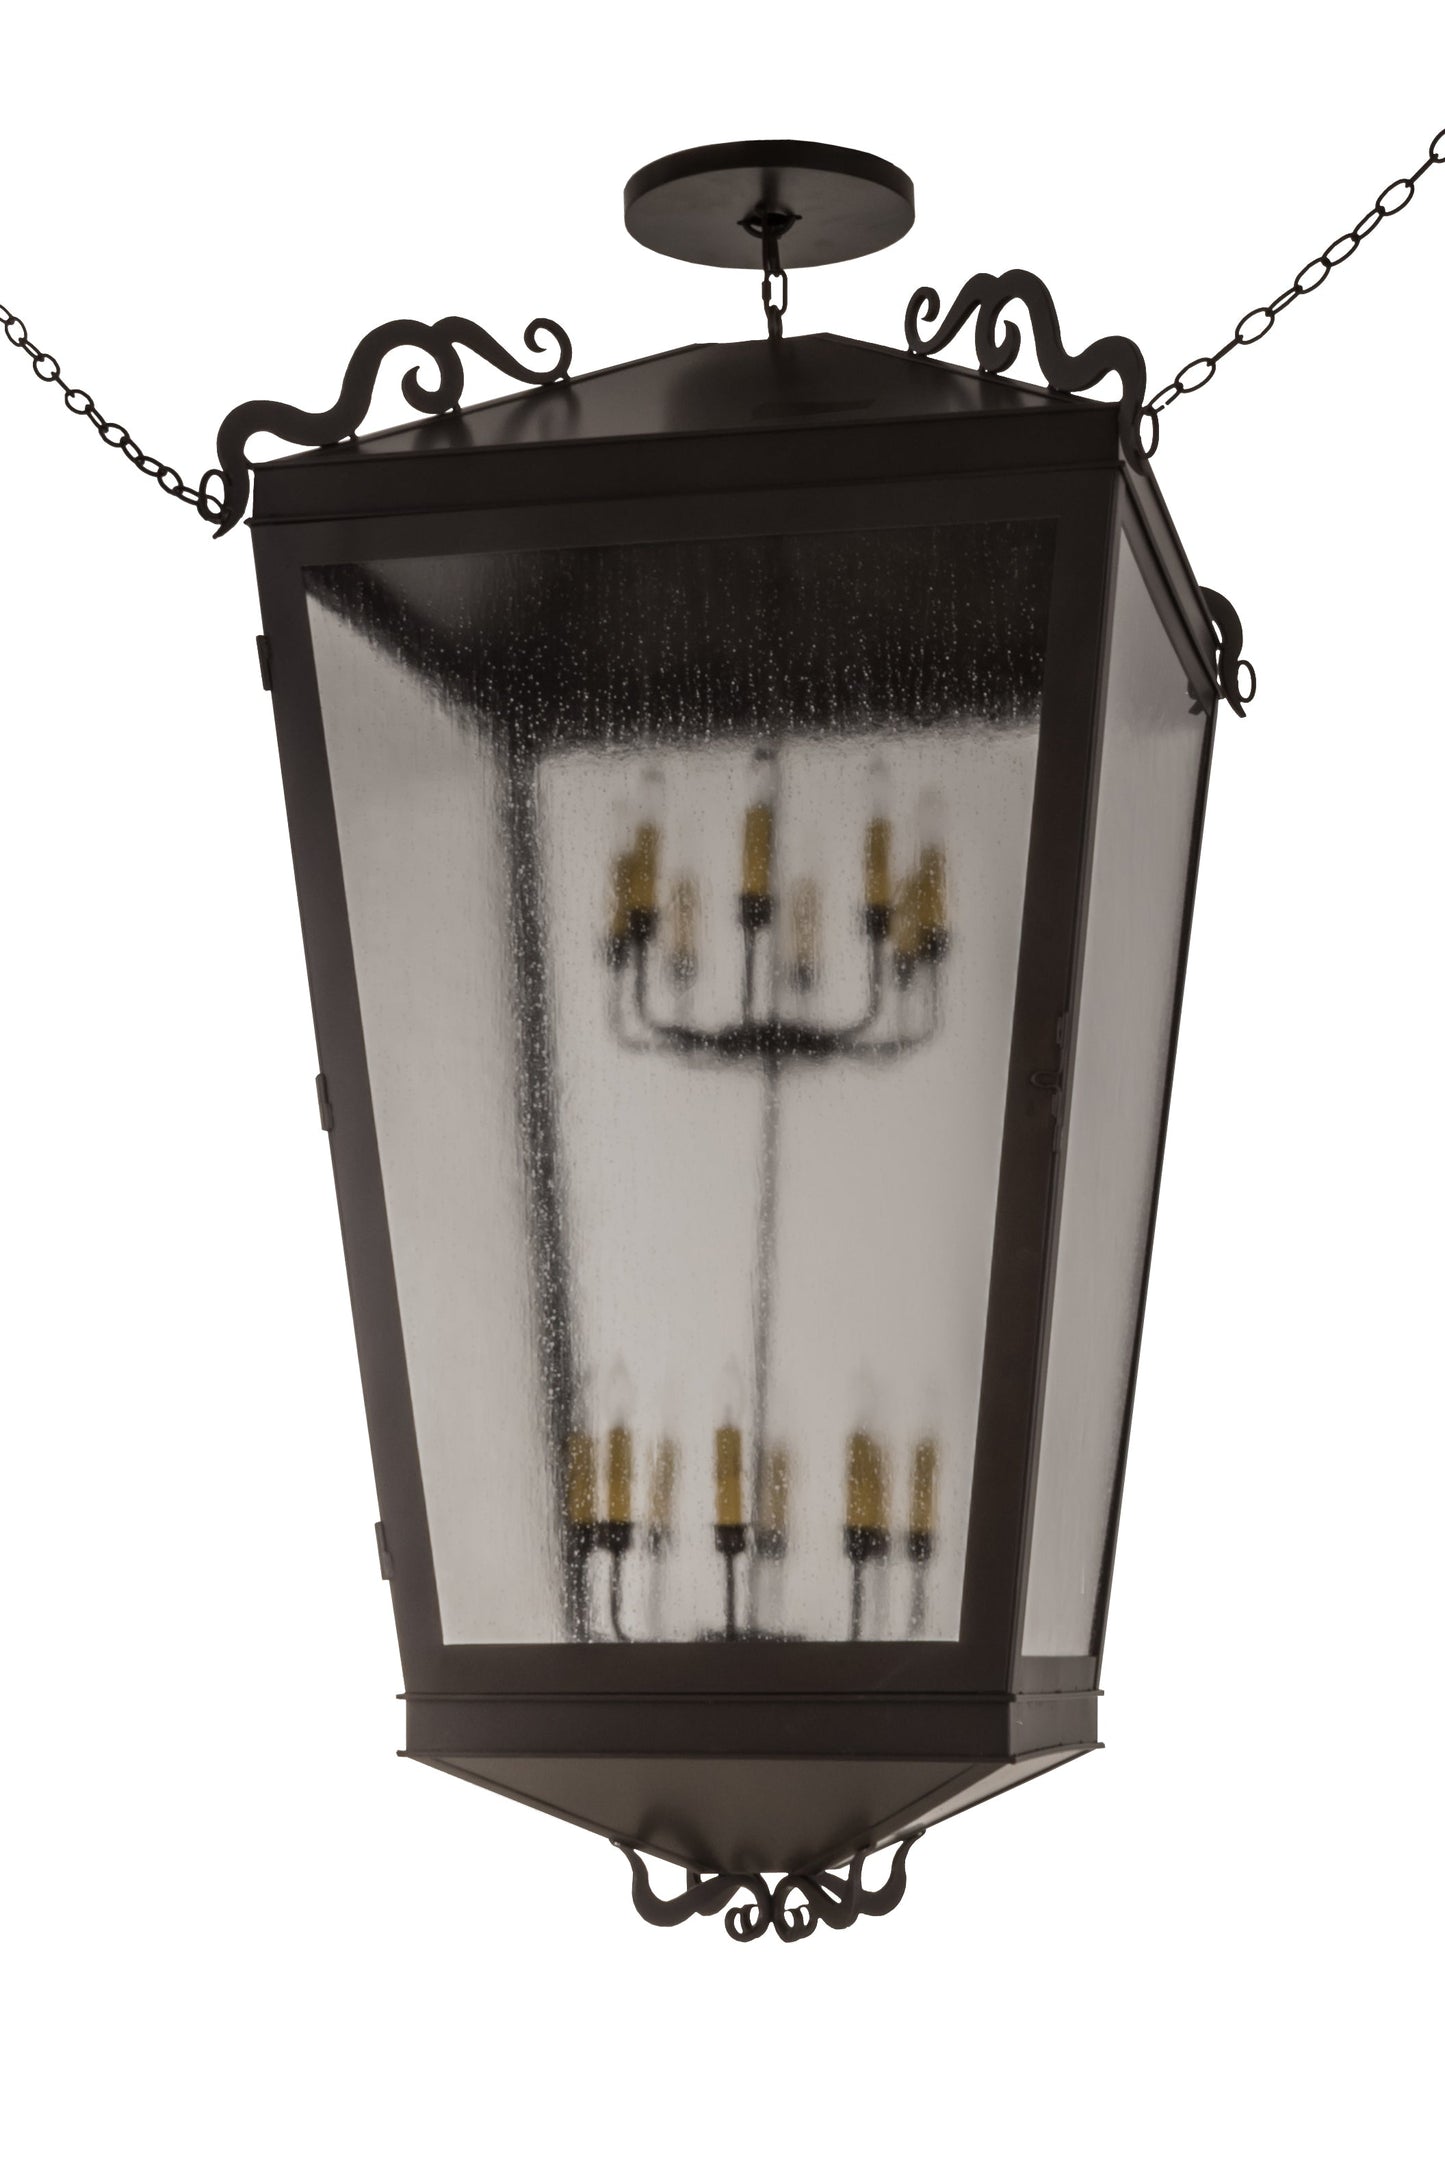 30" Square Madeline Pendant by 2nd Ave Lighting